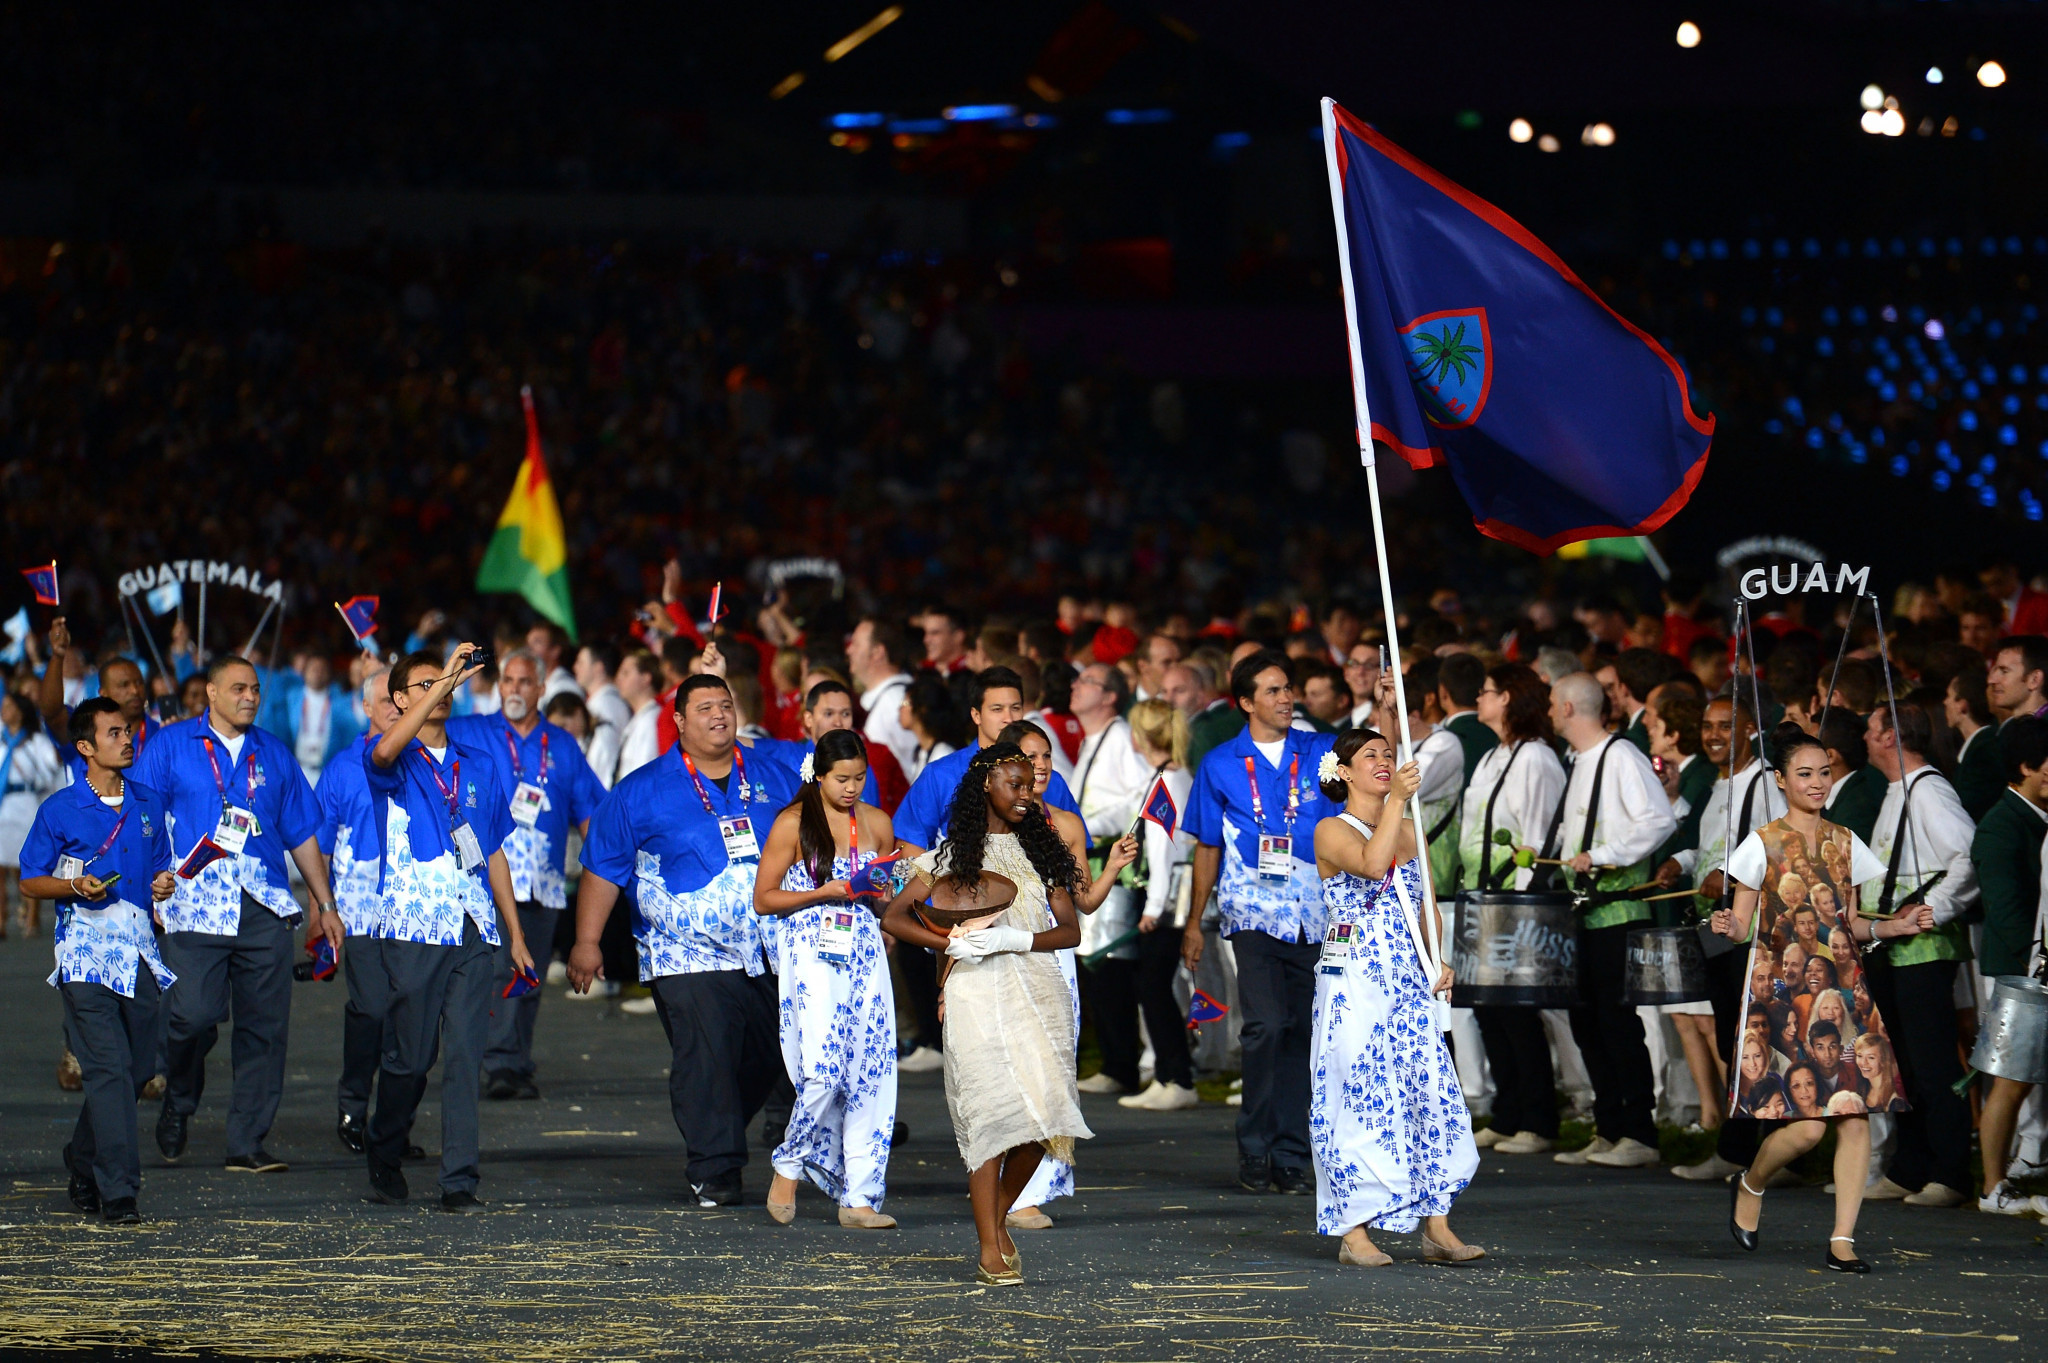 Guam first competed at the Olympics in 1988 ©Getty Images